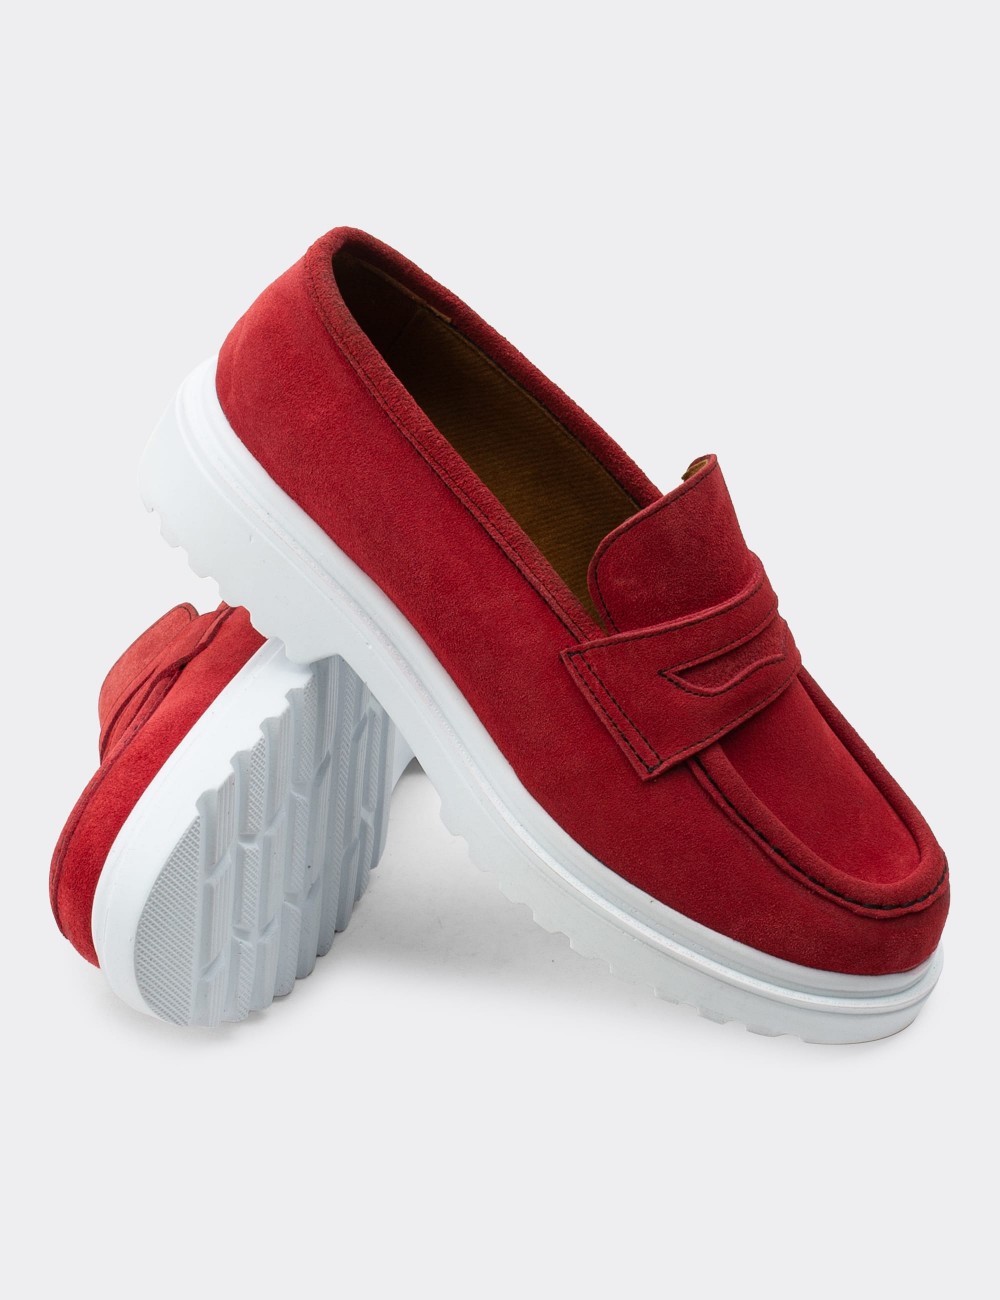 Red Suede Leather Loafers - 01903ZKRMP01